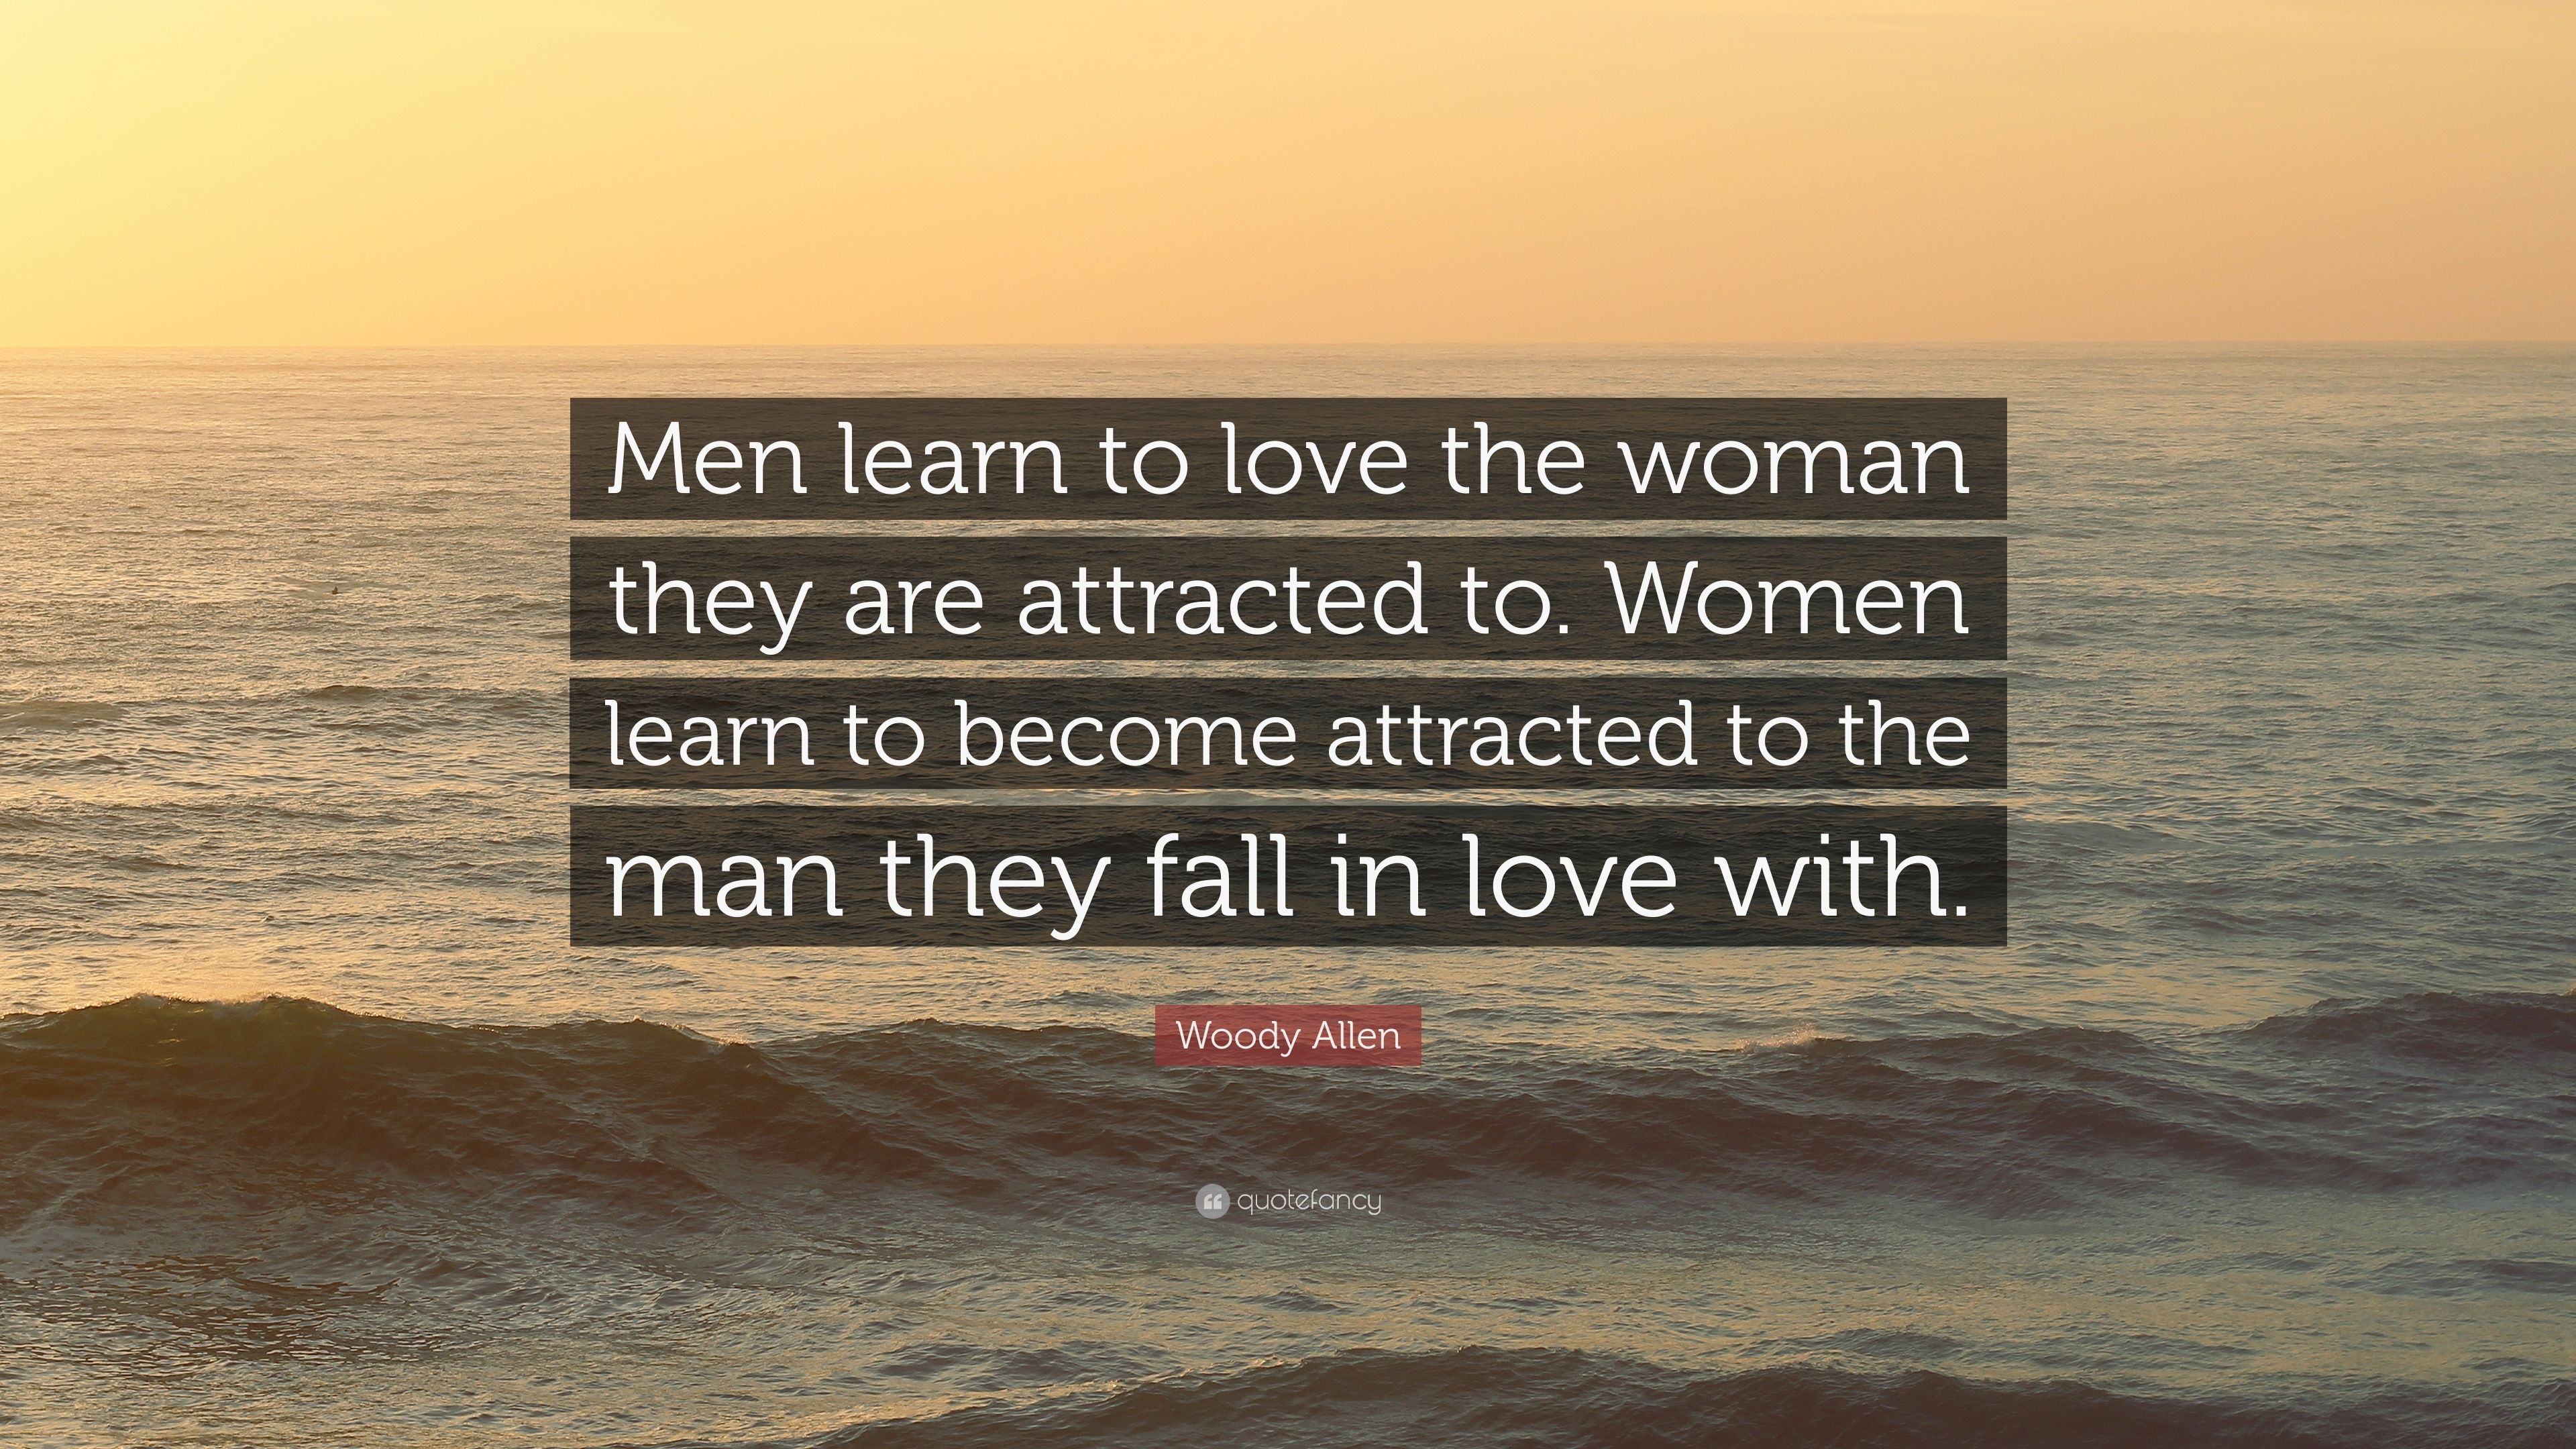 Woody Allen Quote: “Men learn to love the woman they are attracted